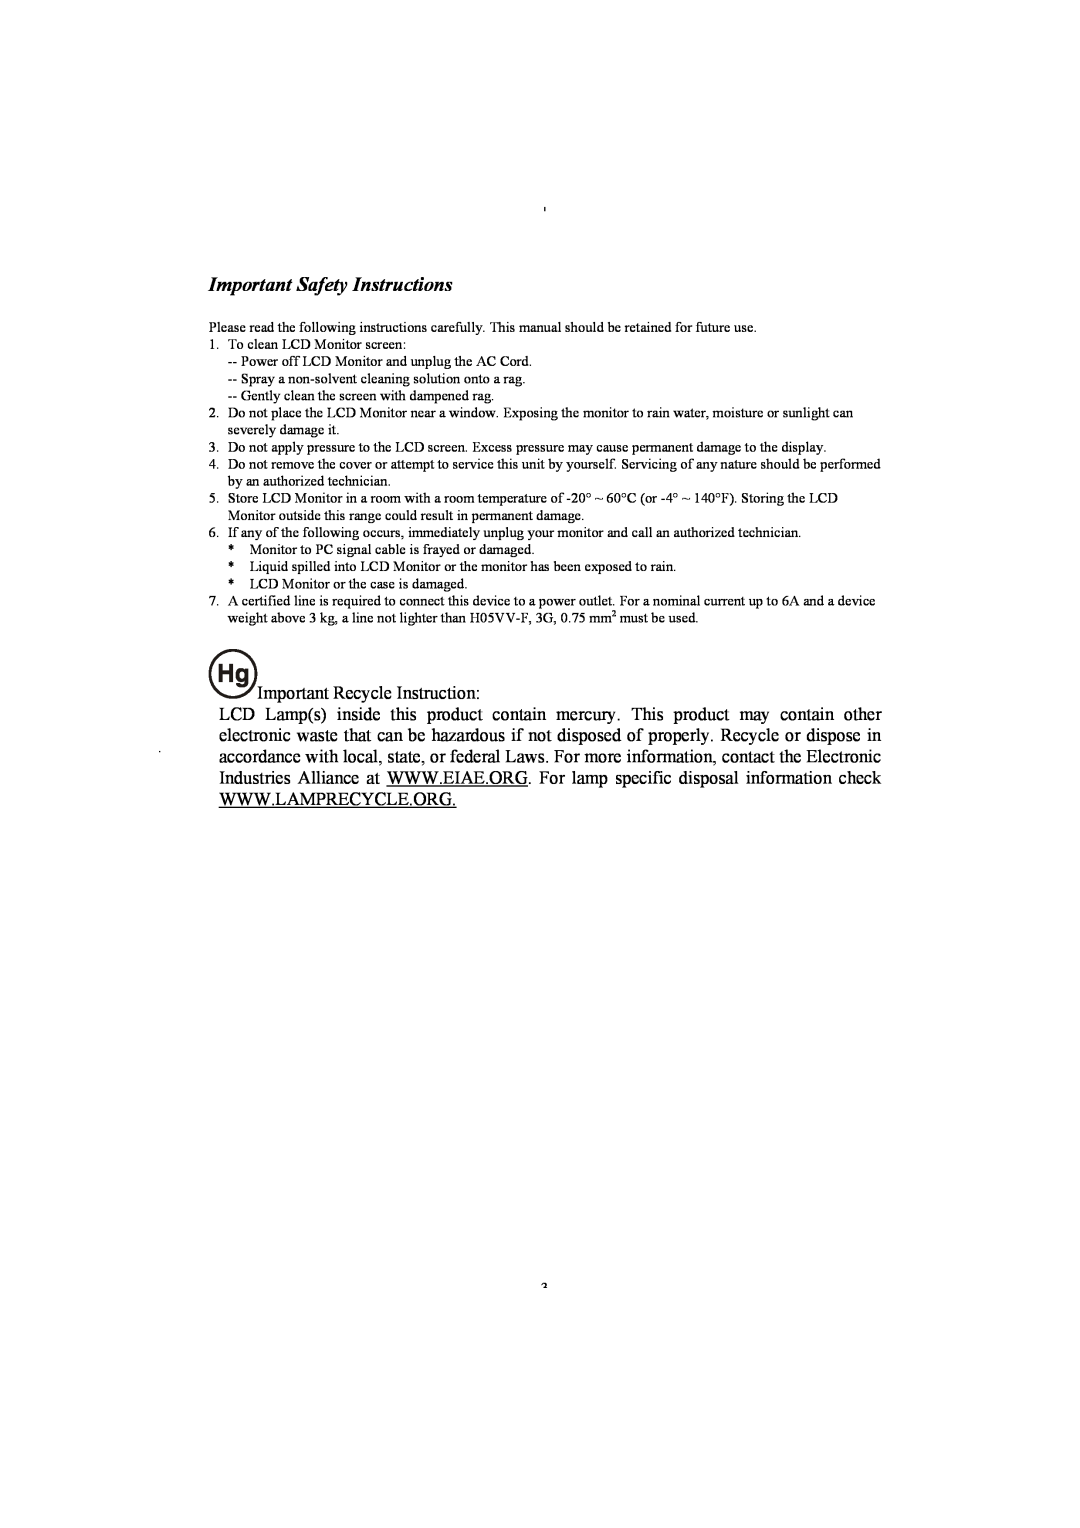 Planar PL2011 manual Important Safety Instructions, Important Recycle Instruction 